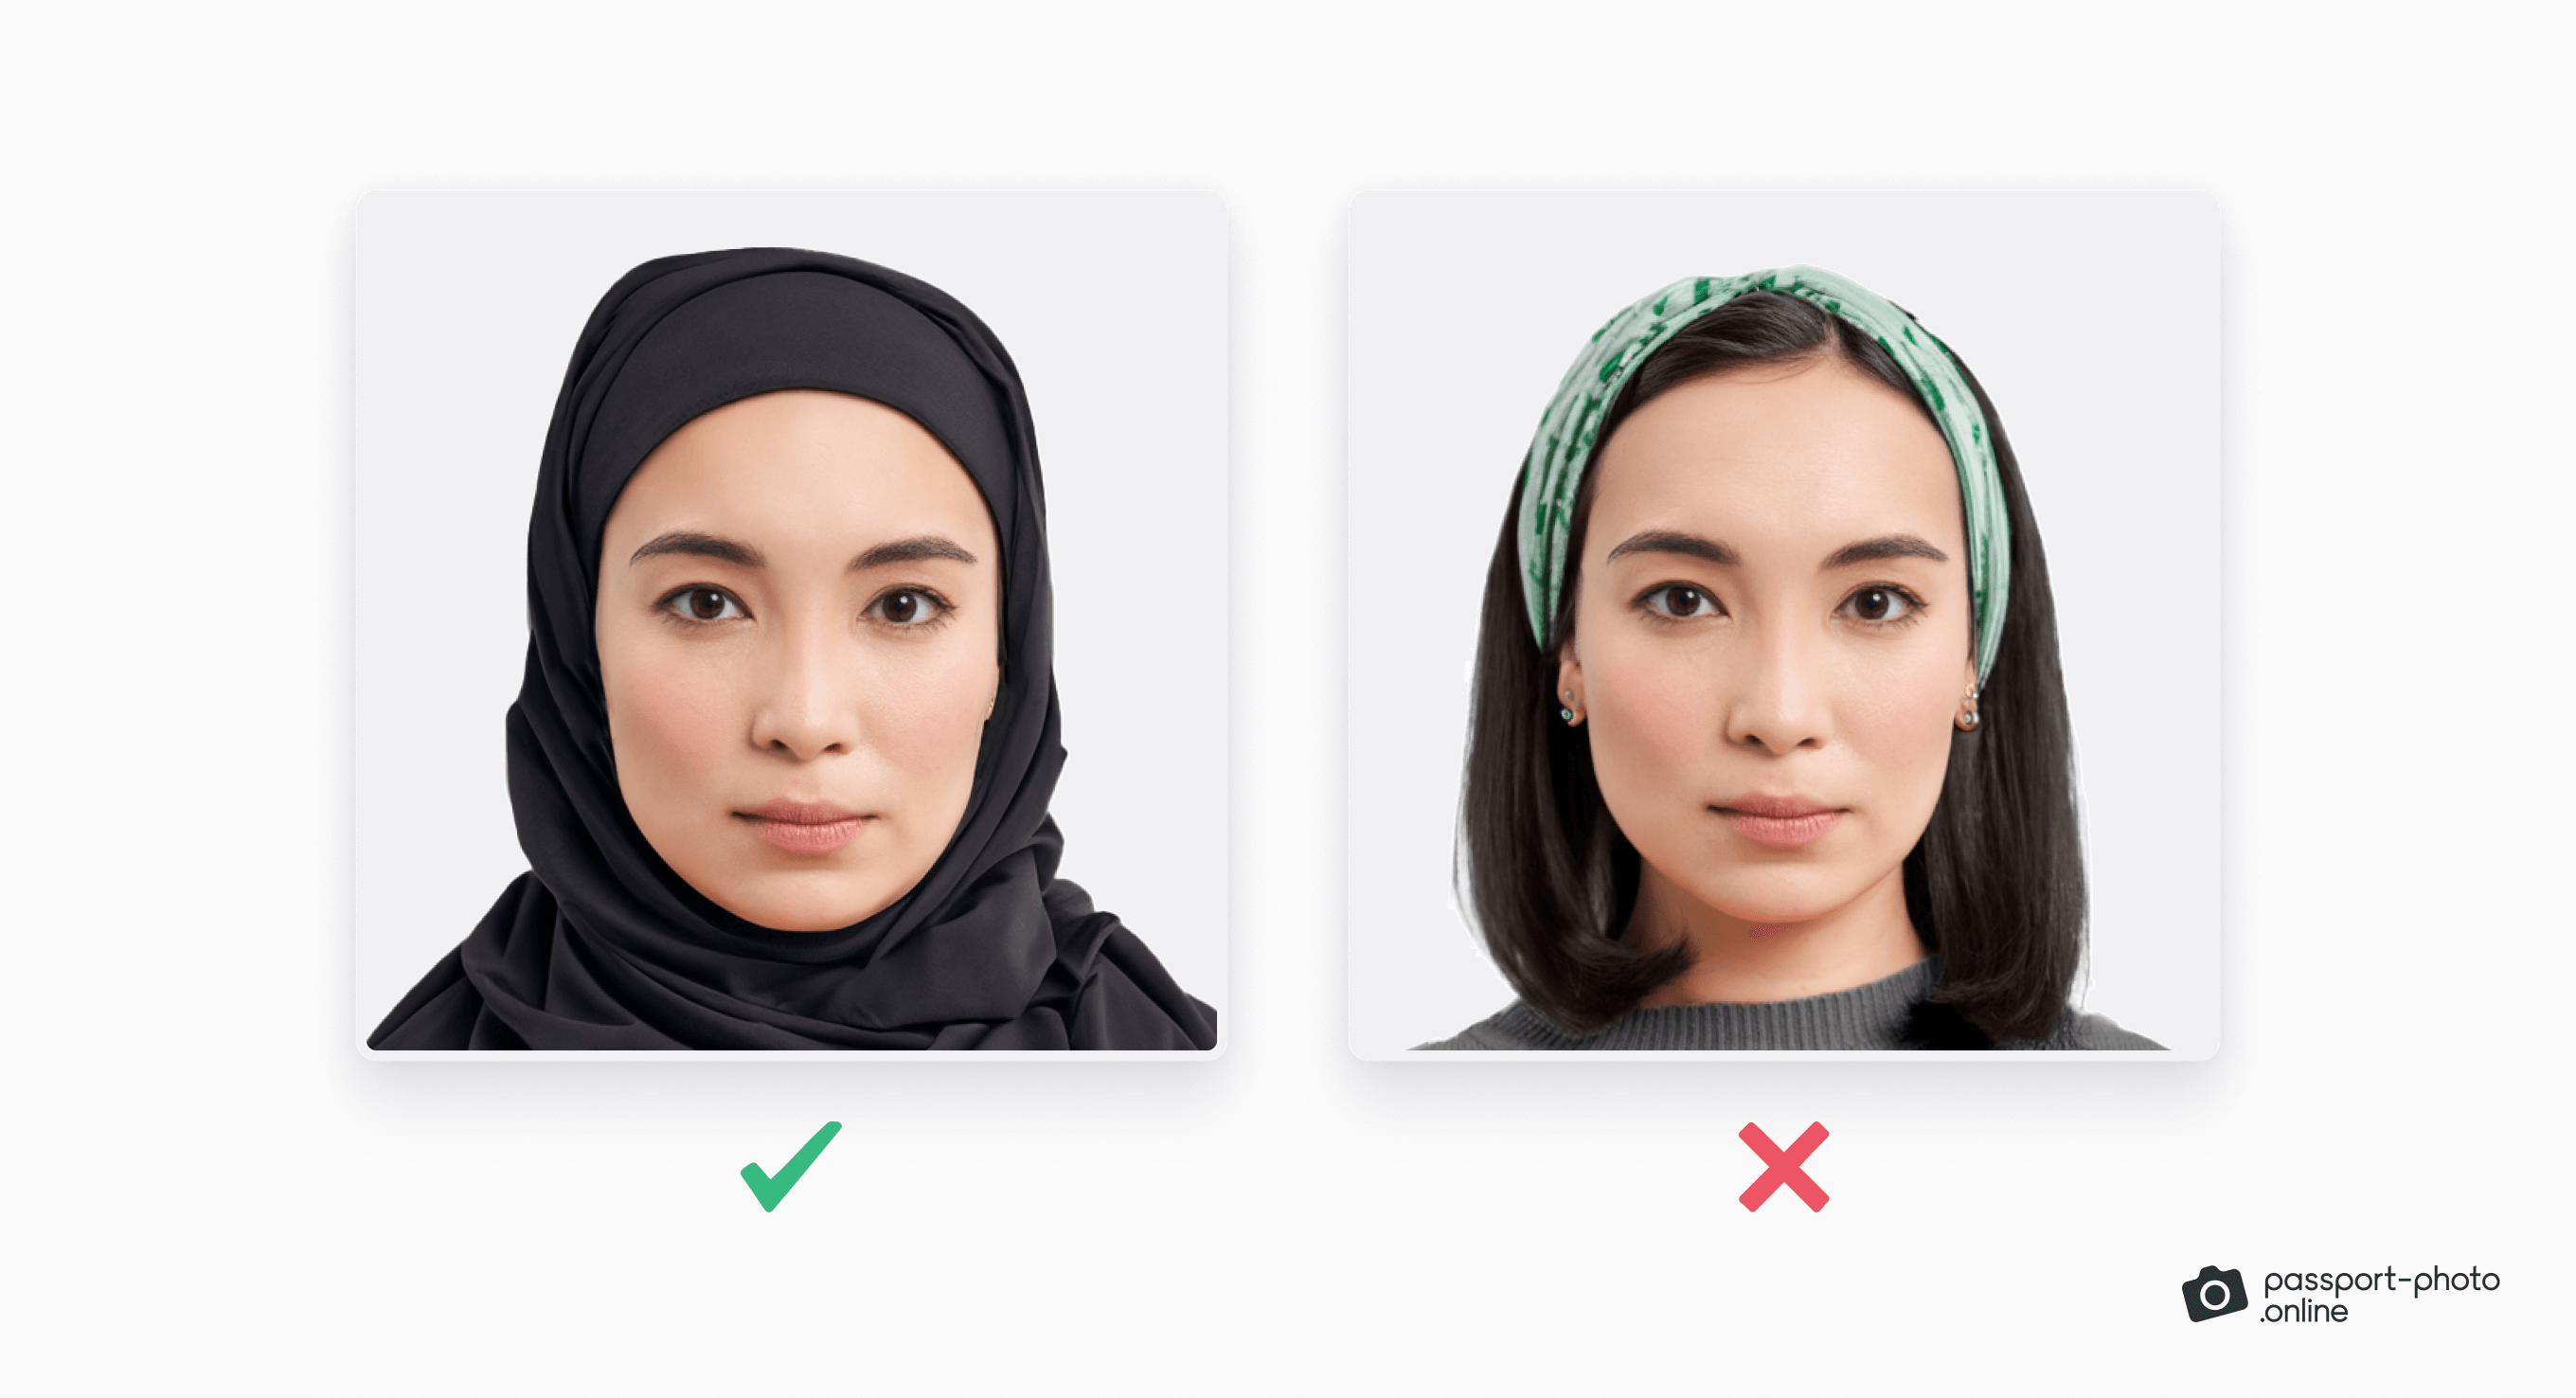 South Africa passport photo requirements